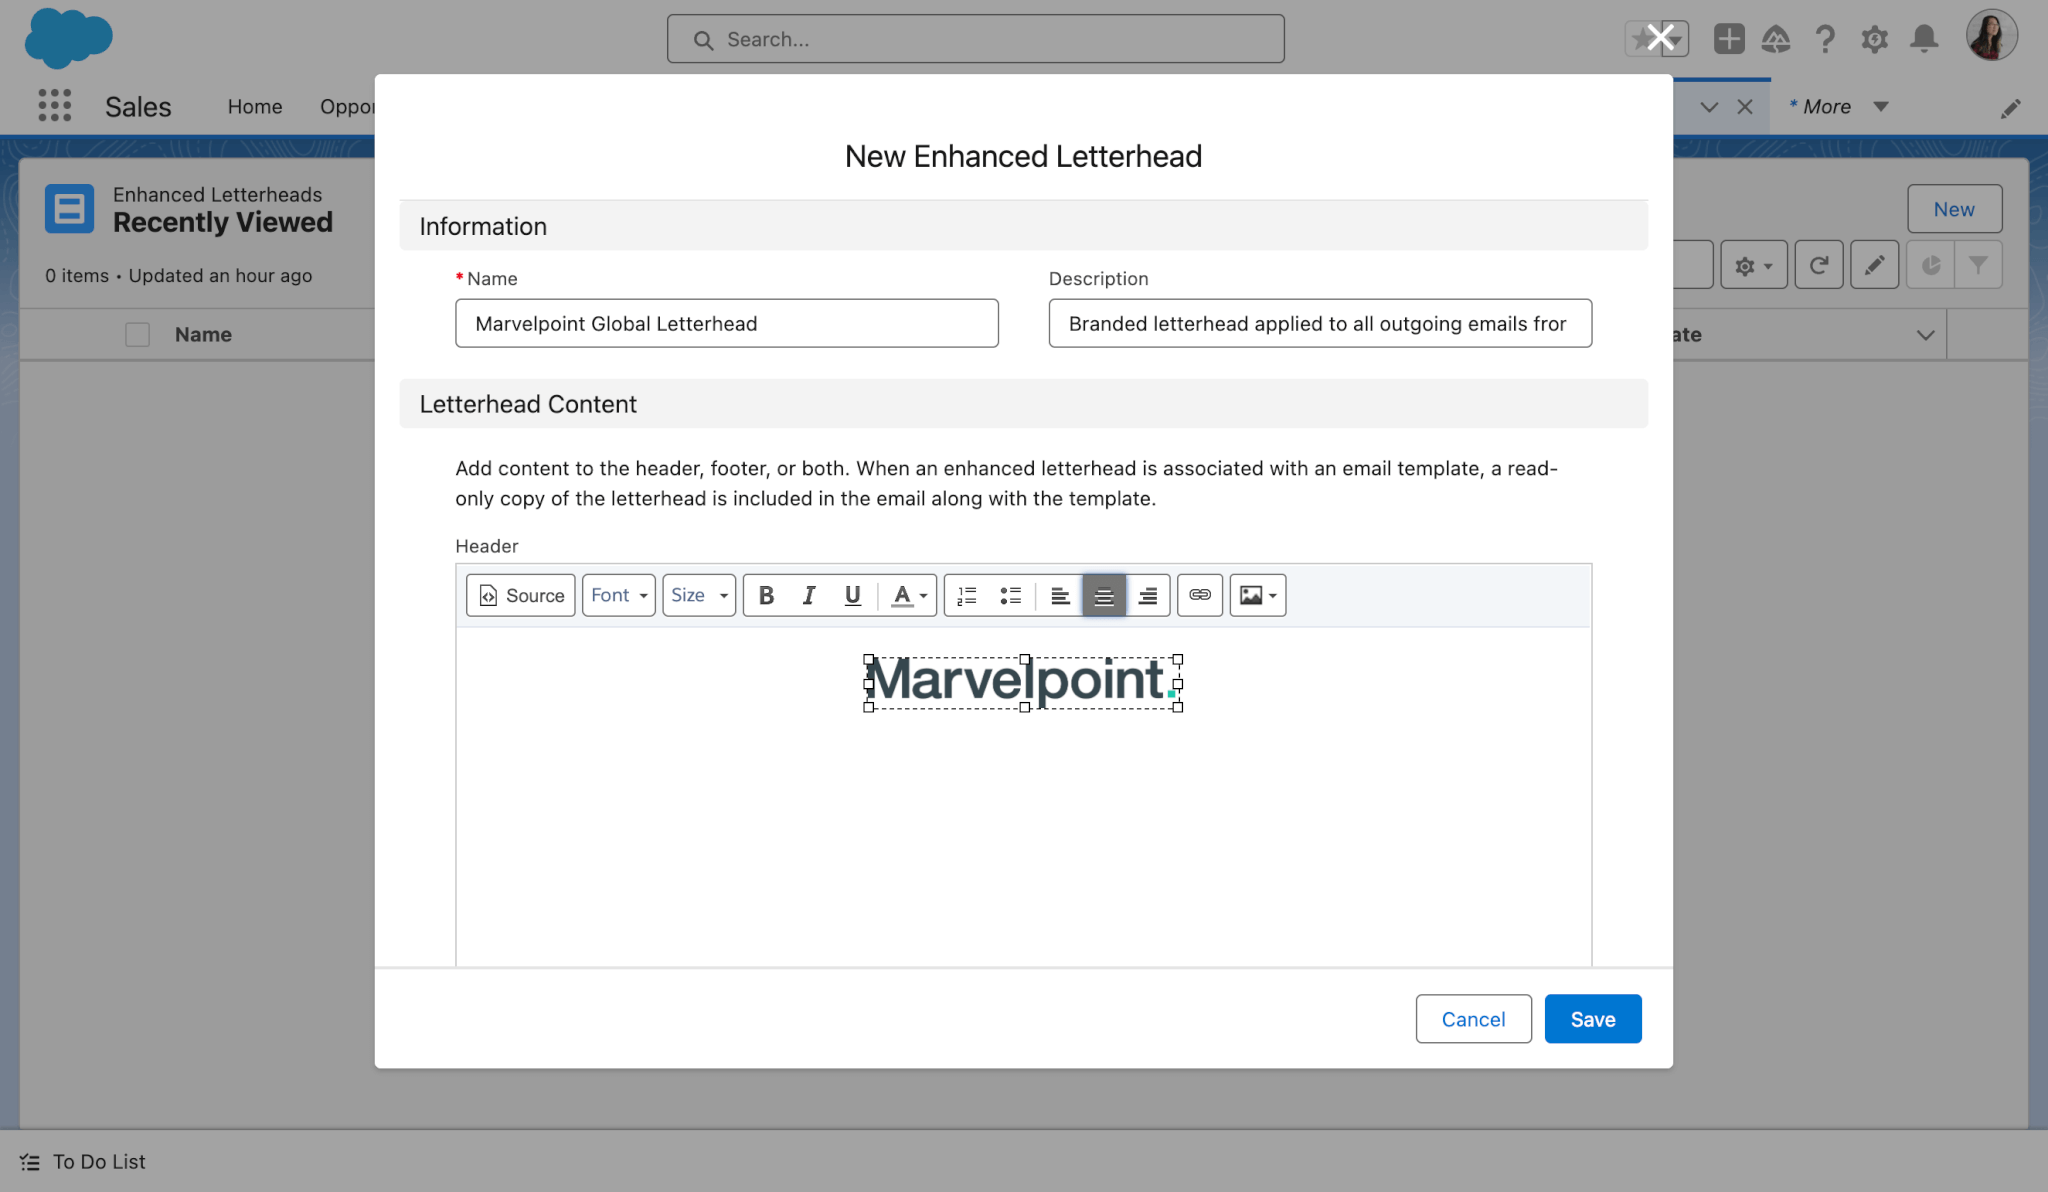 Enhanced Letterhead creation modal with header section in view